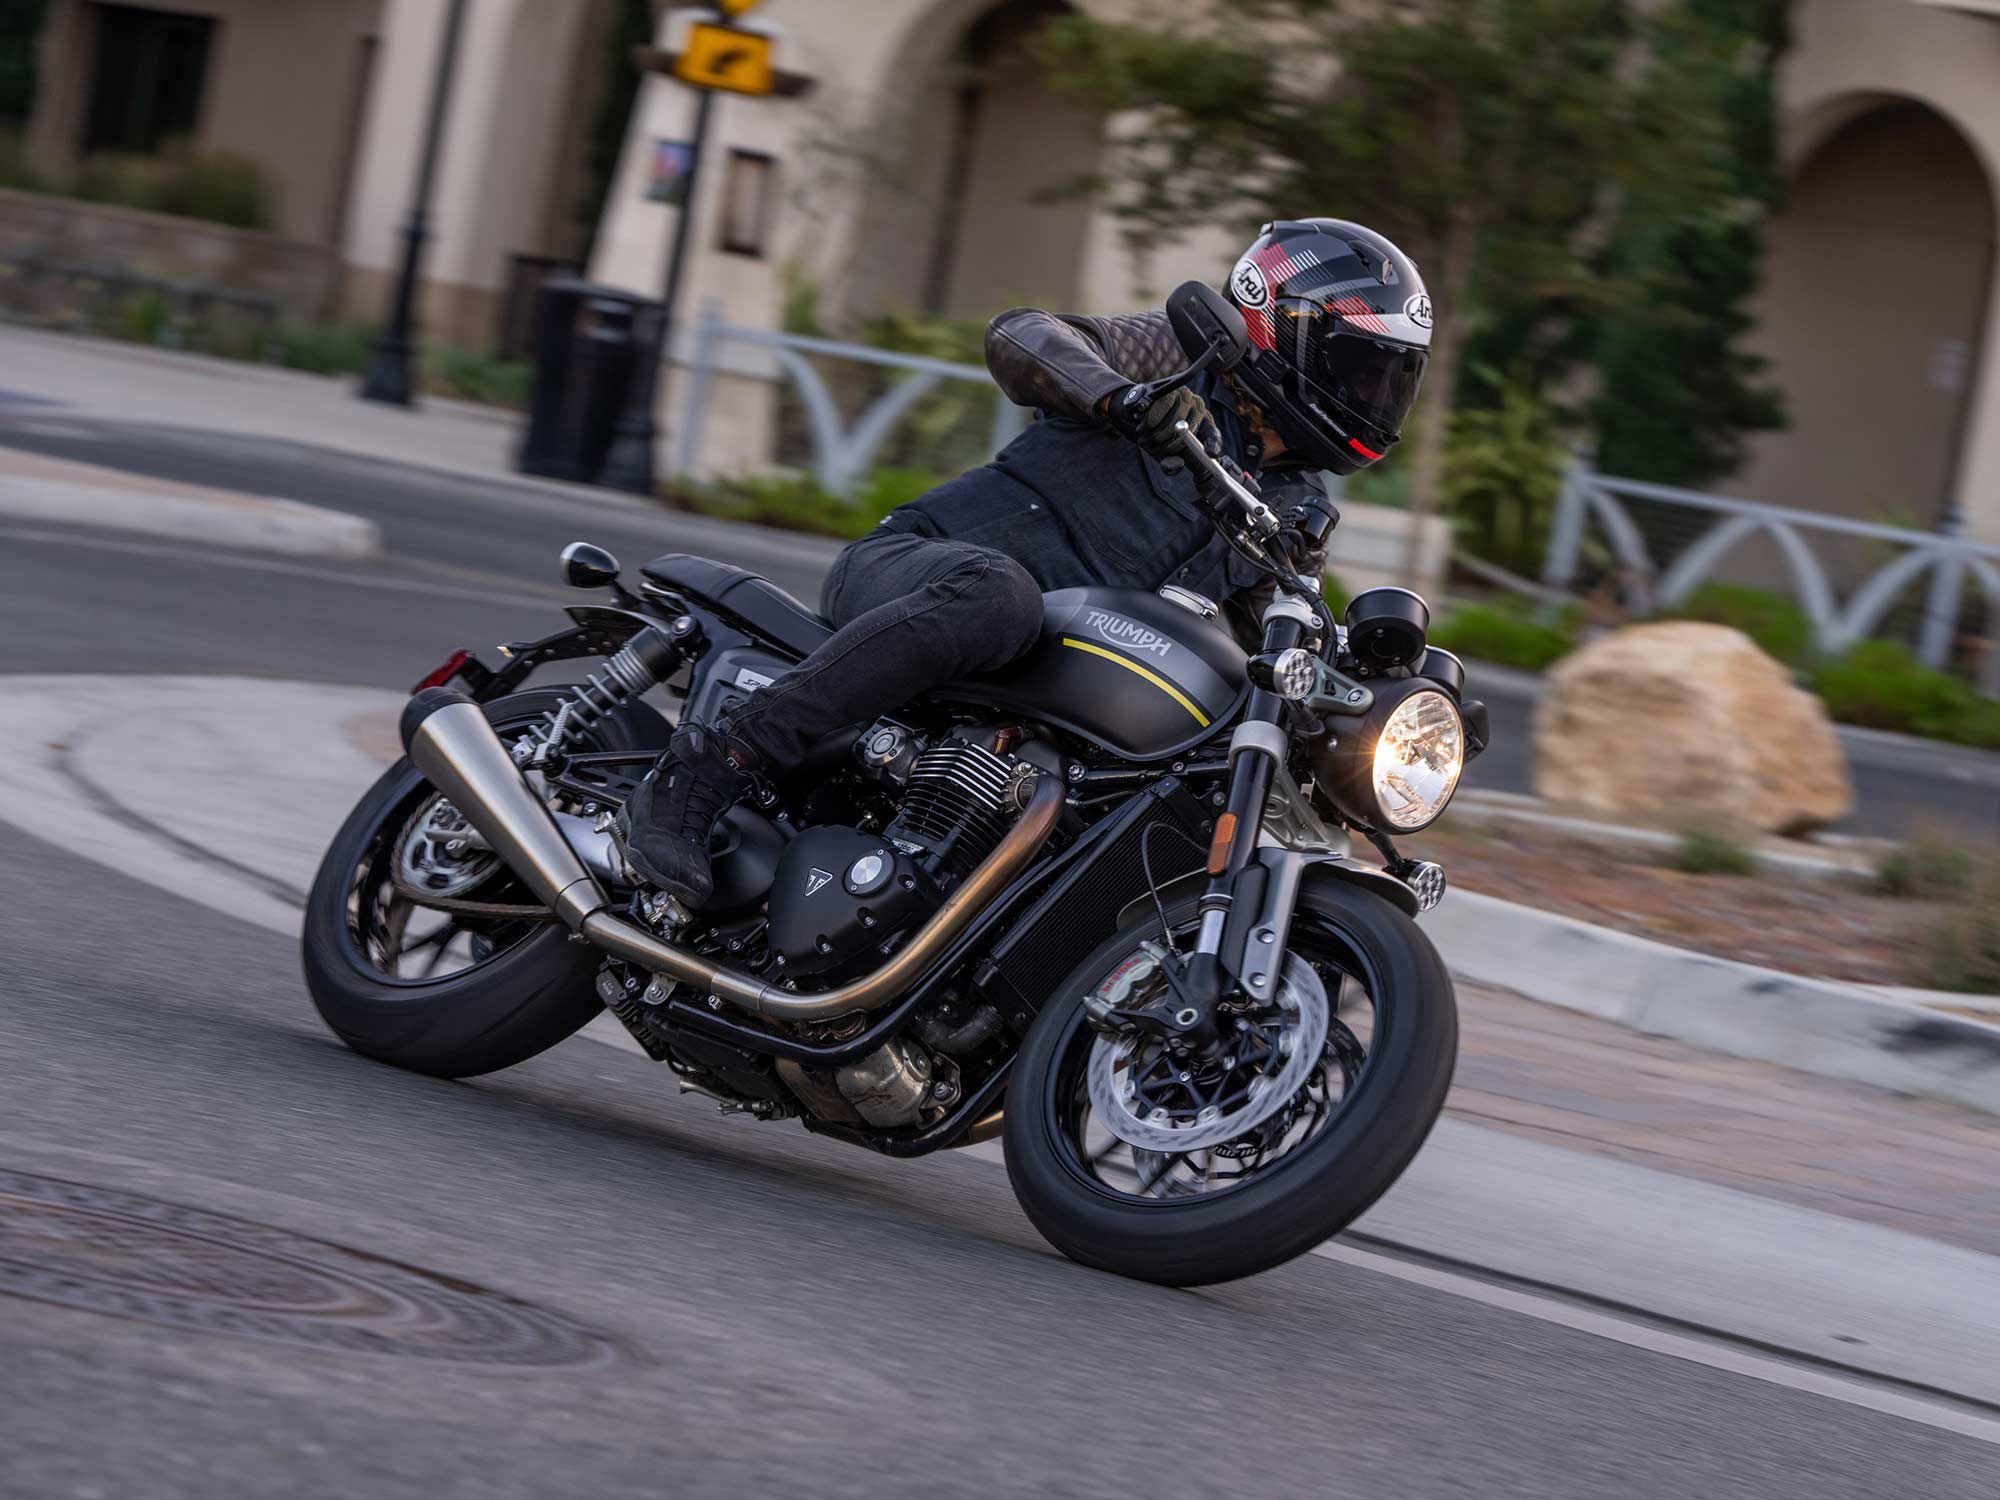 The Speed Twin handles more agilely than you’d expect based on its nearly 500-pound fueled curb weight.